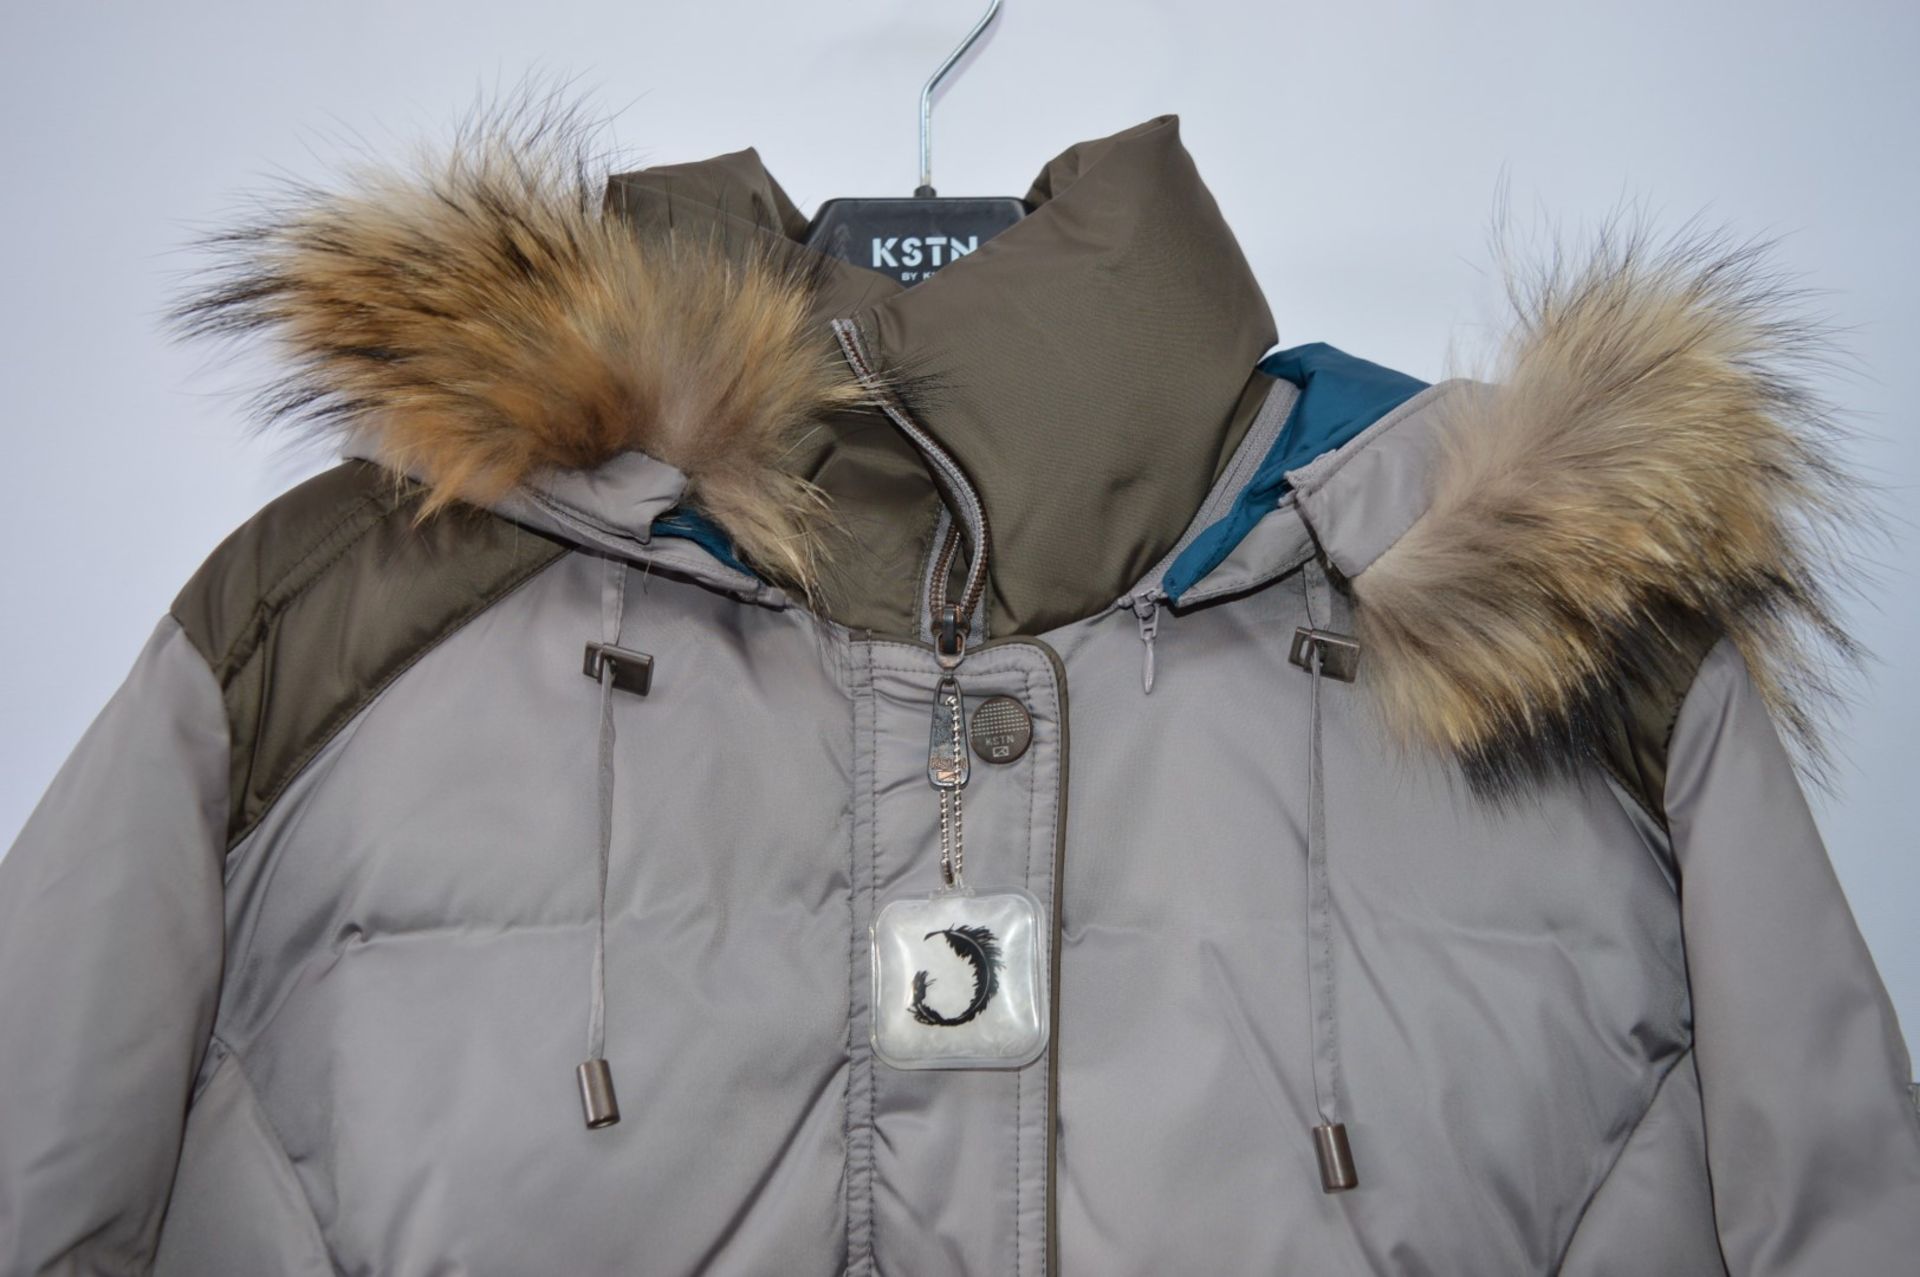 1 x Steilmann KSTN By Kirsten Womens Coat - Real Down Feather Filled Coat With Functional Pockets, - Image 3 of 13